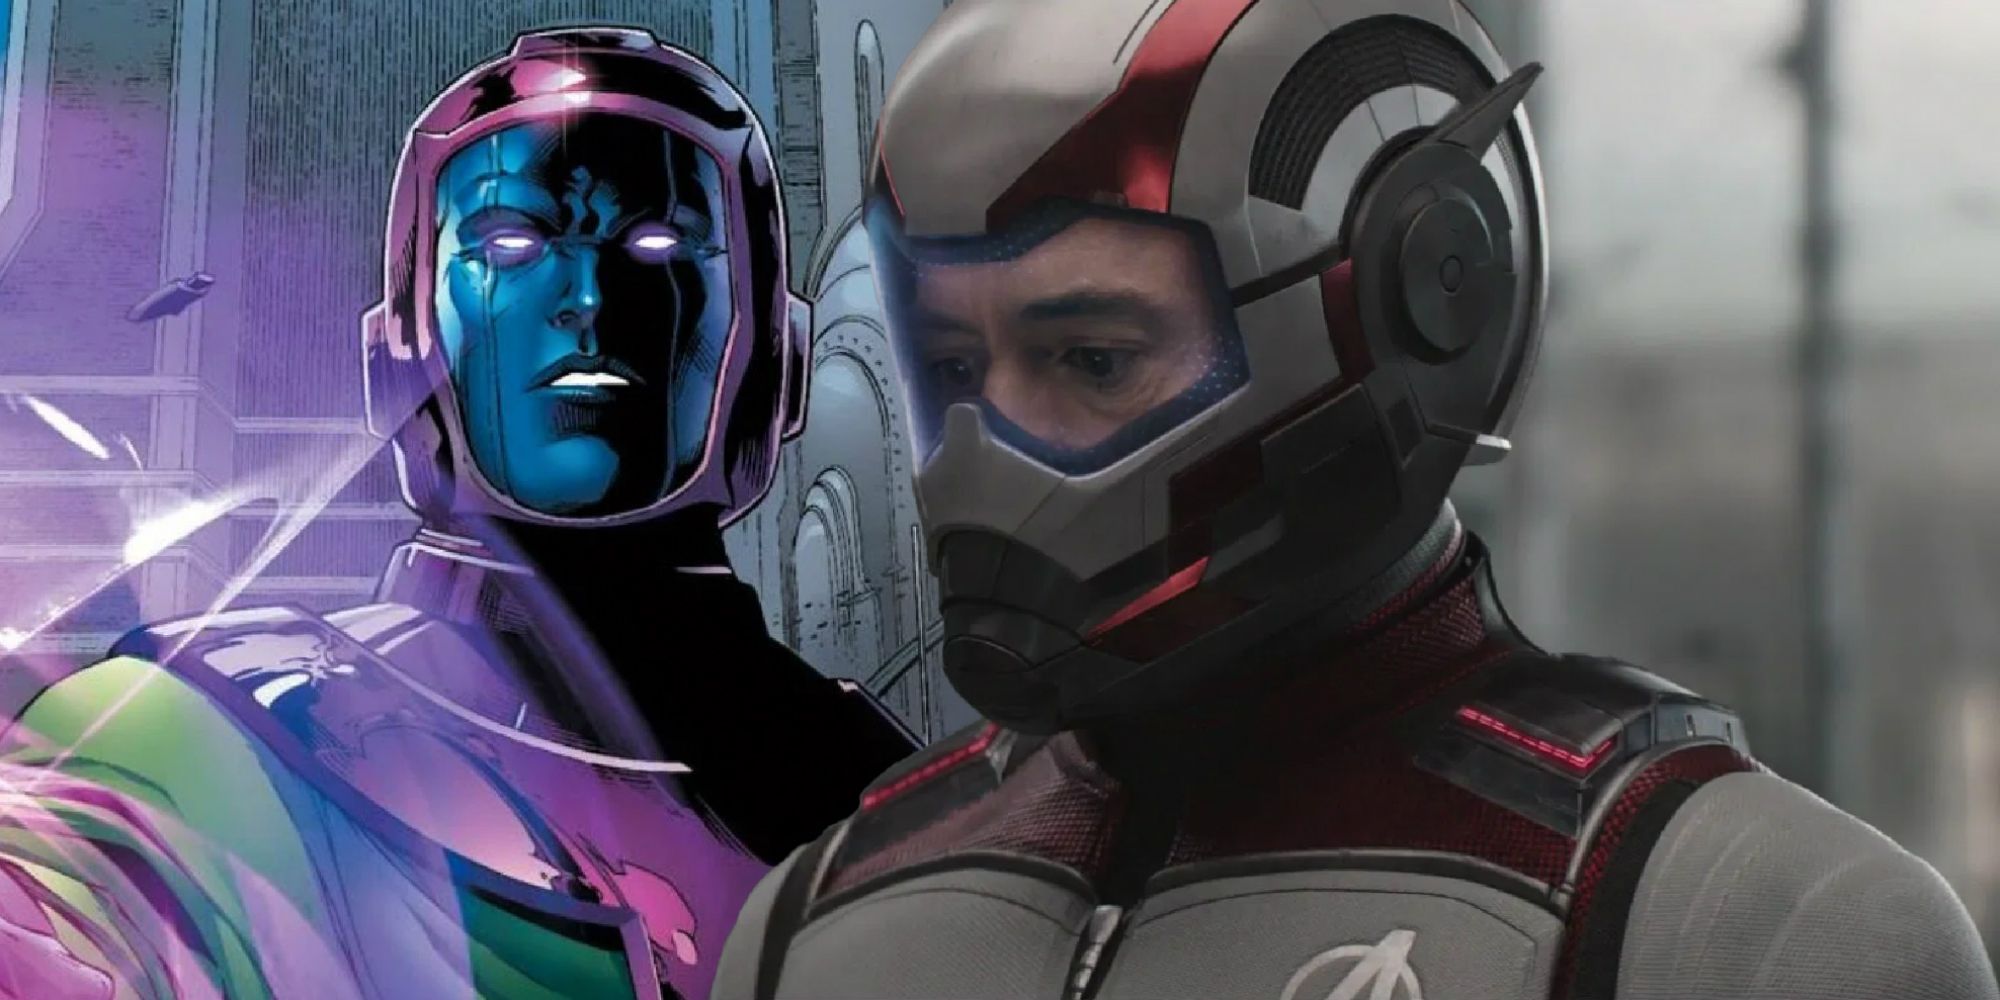 Robert Downey Jr as Iron Man in Avengers Endgame and Kang the Conqueror in Marvel Comics